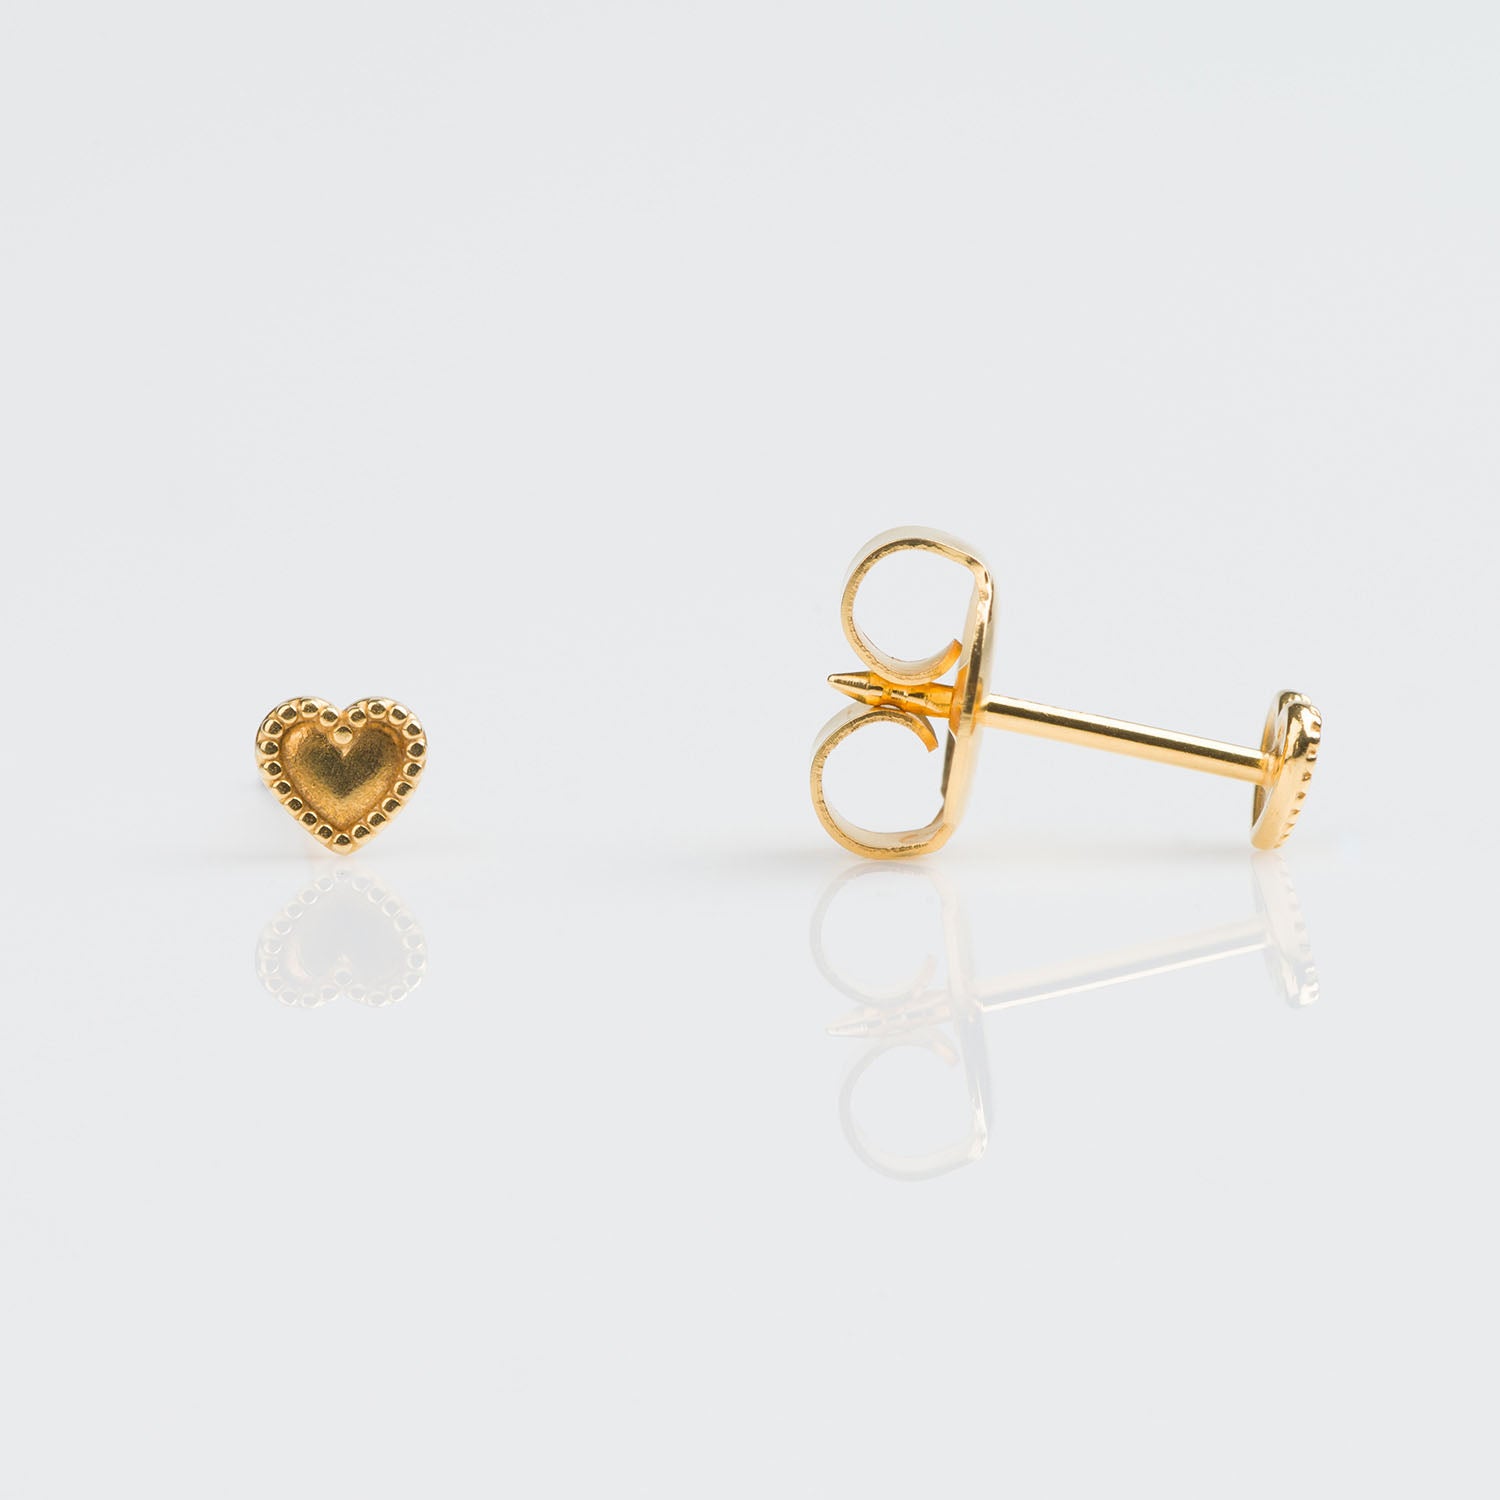 9ct gold beaded heart earrings pierced with the Studex System 75 Gun